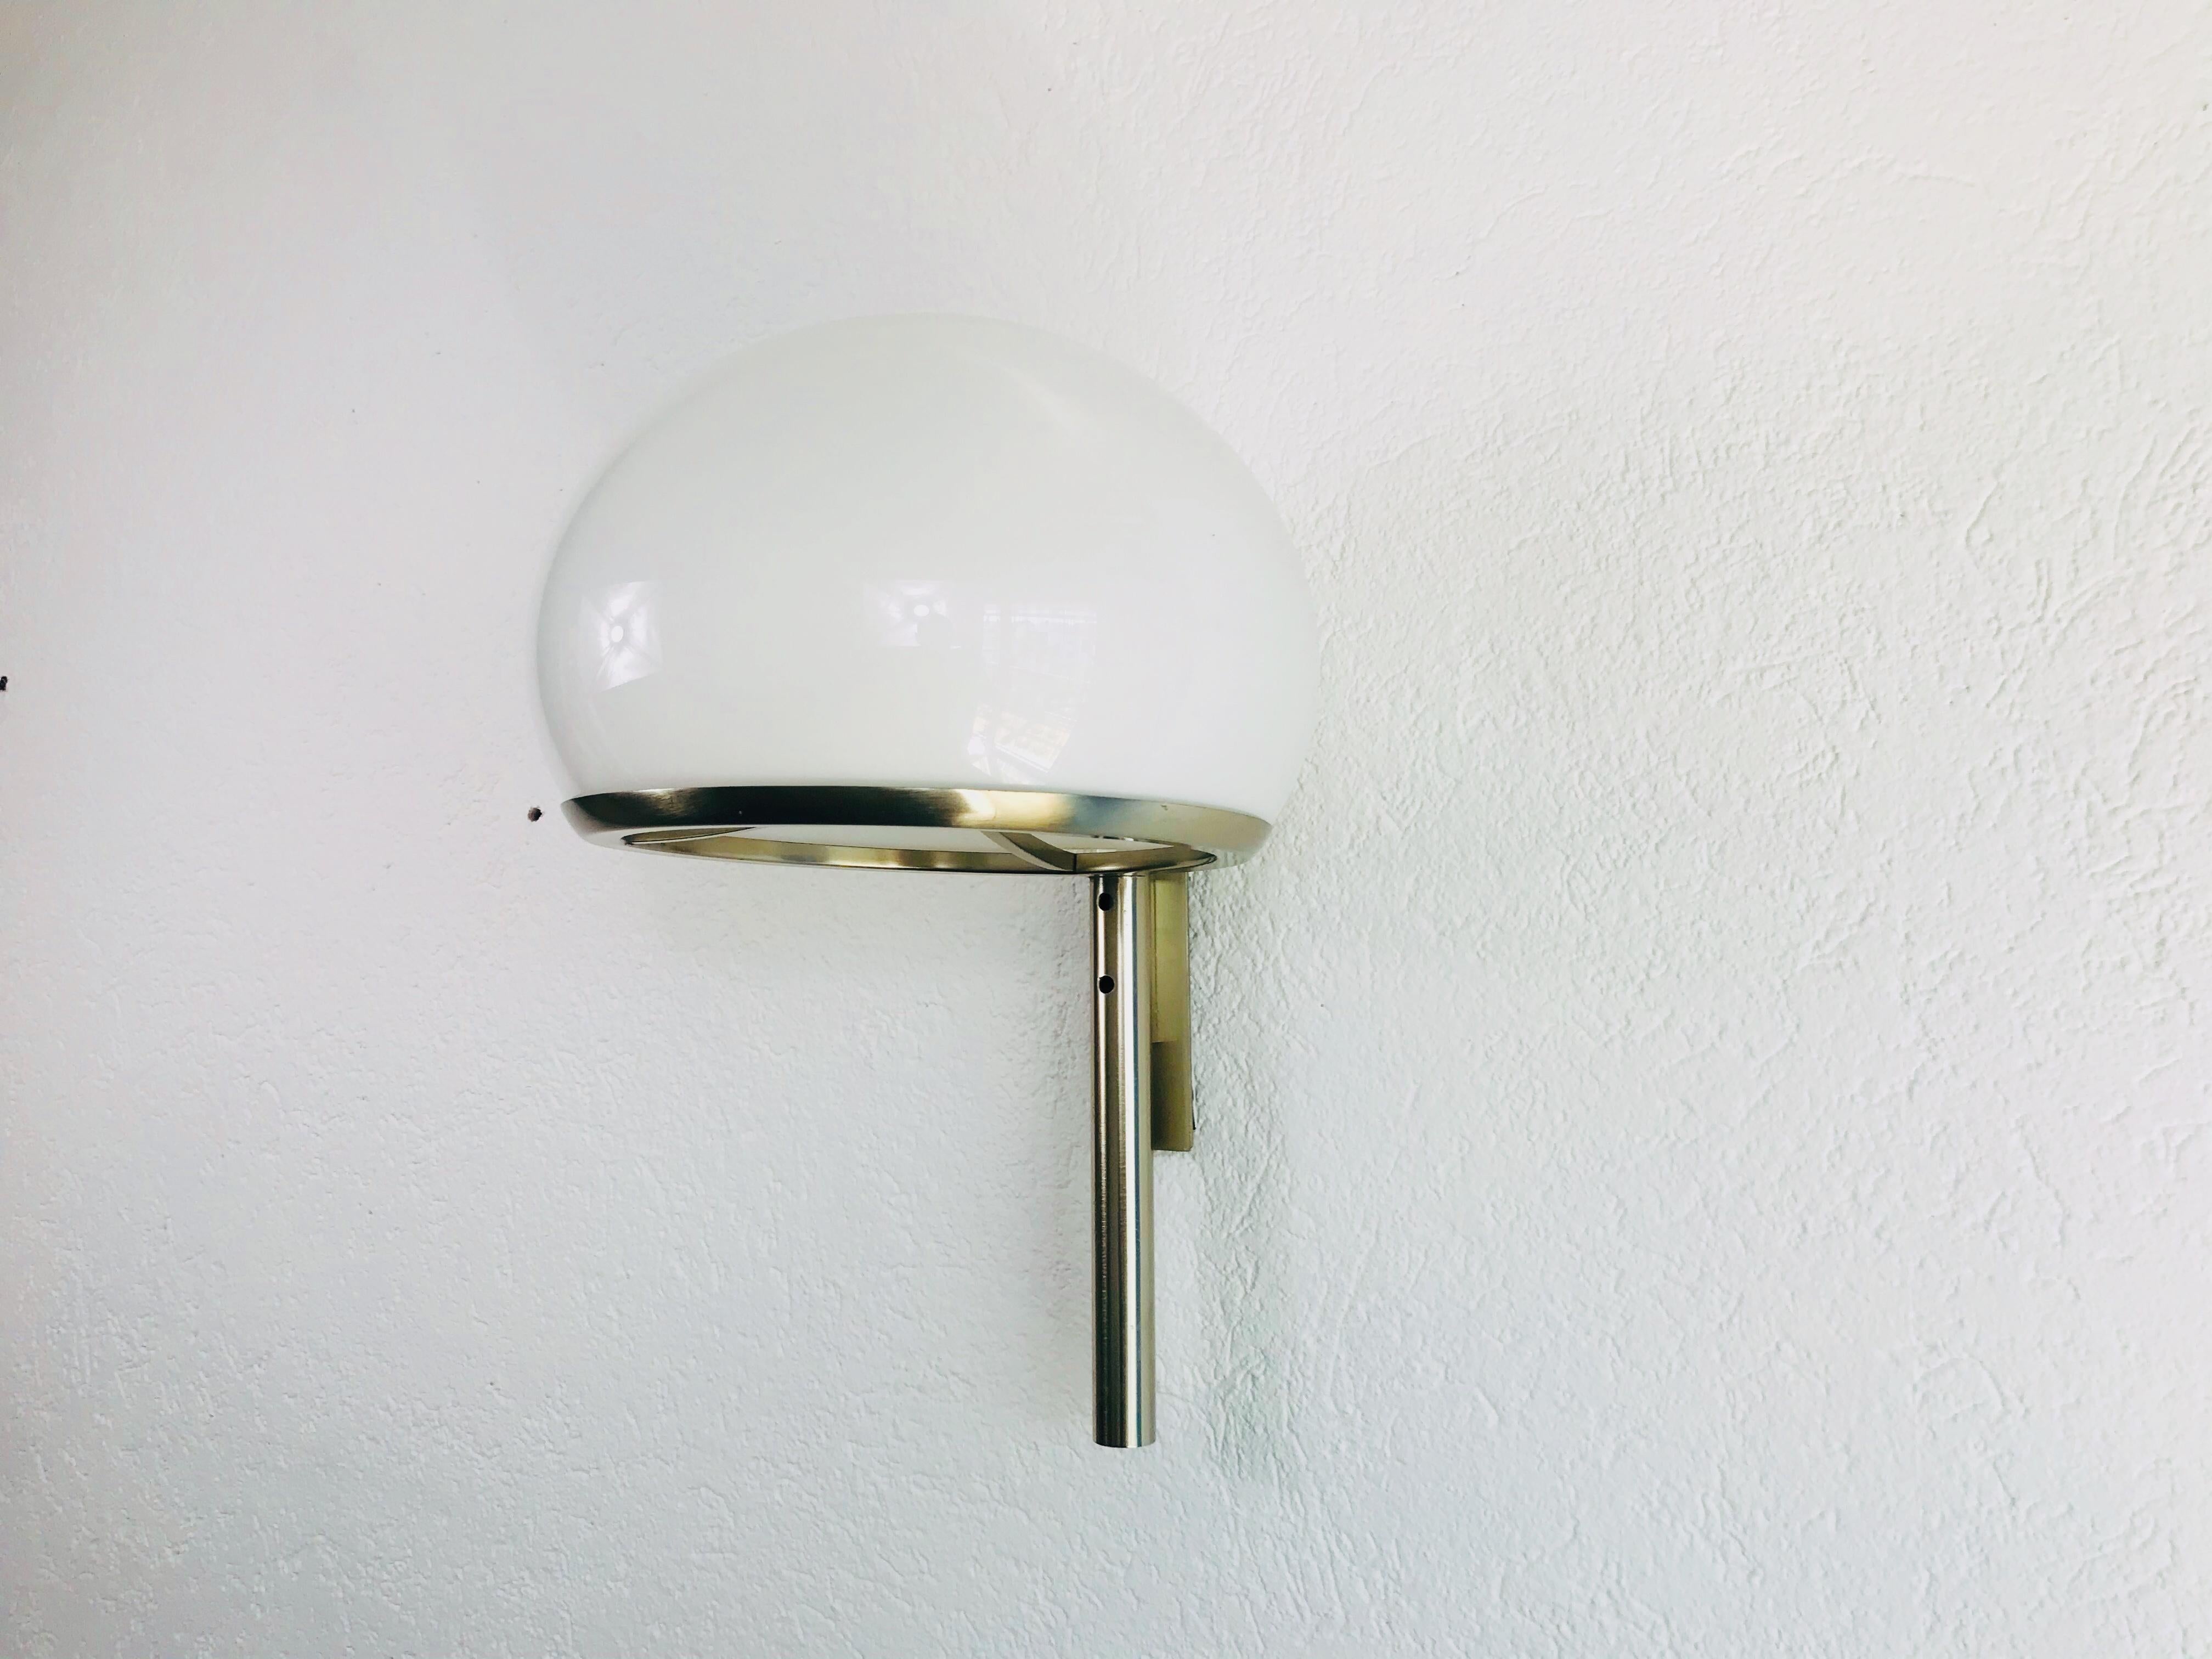 Beautiful Italian wall lamp by Arteluce. Solid chrome body with Perspex lamp shade. It has an extraordinary shape and is in a very good vintage condition.

The lights requires one B15 light bulbs.

Free worldwide standard shipping.